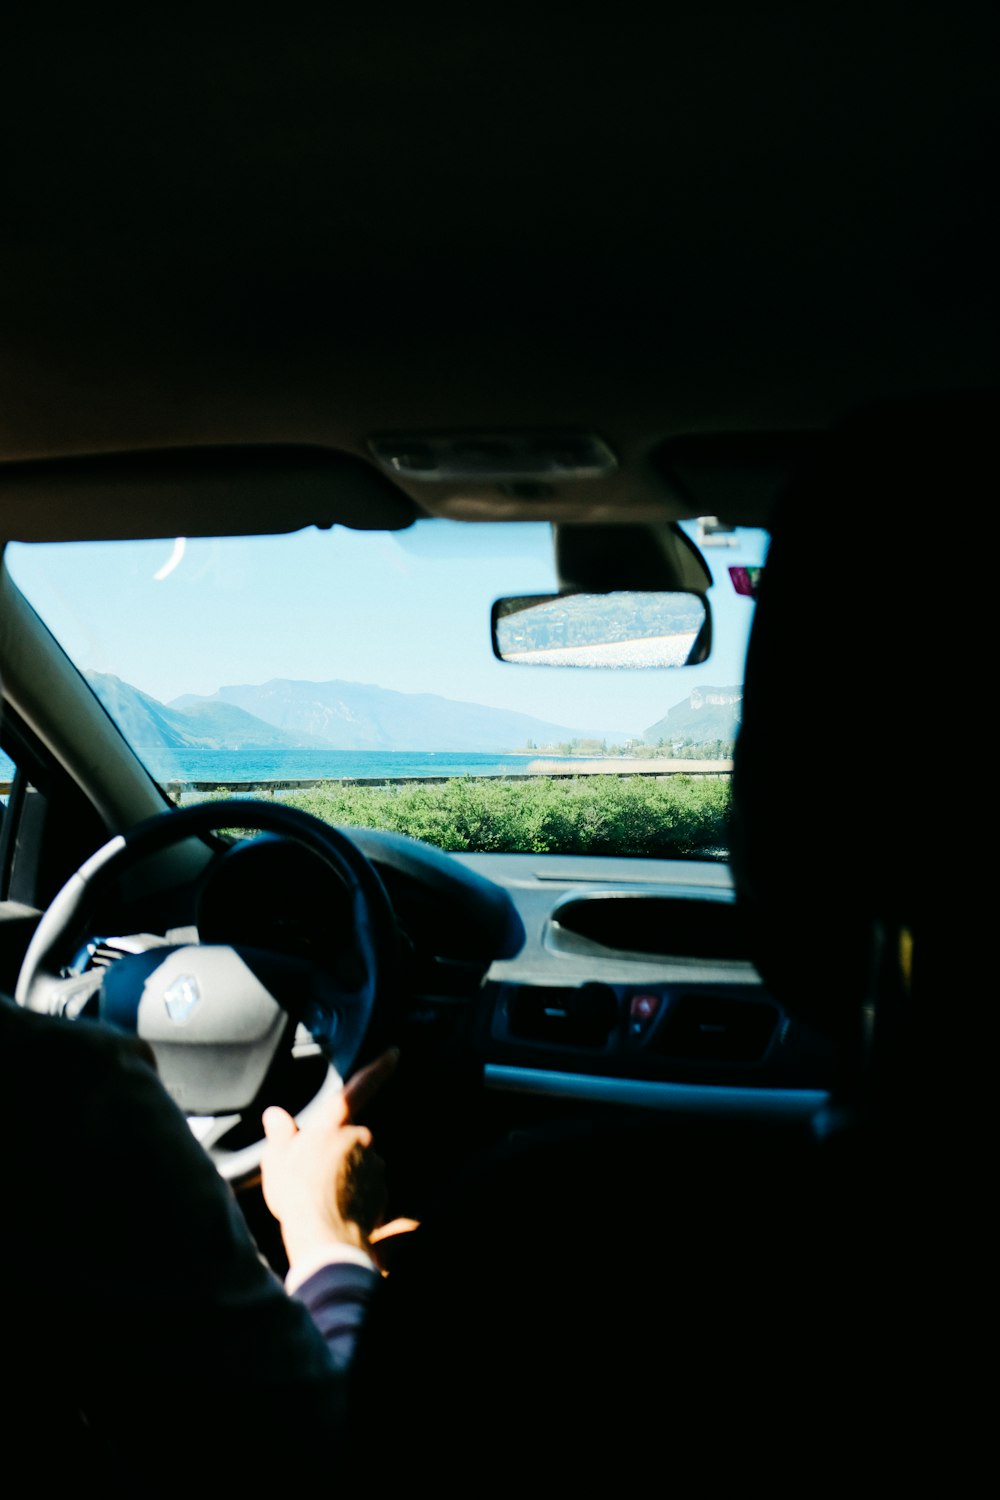 a person driving a car with mountains in the background